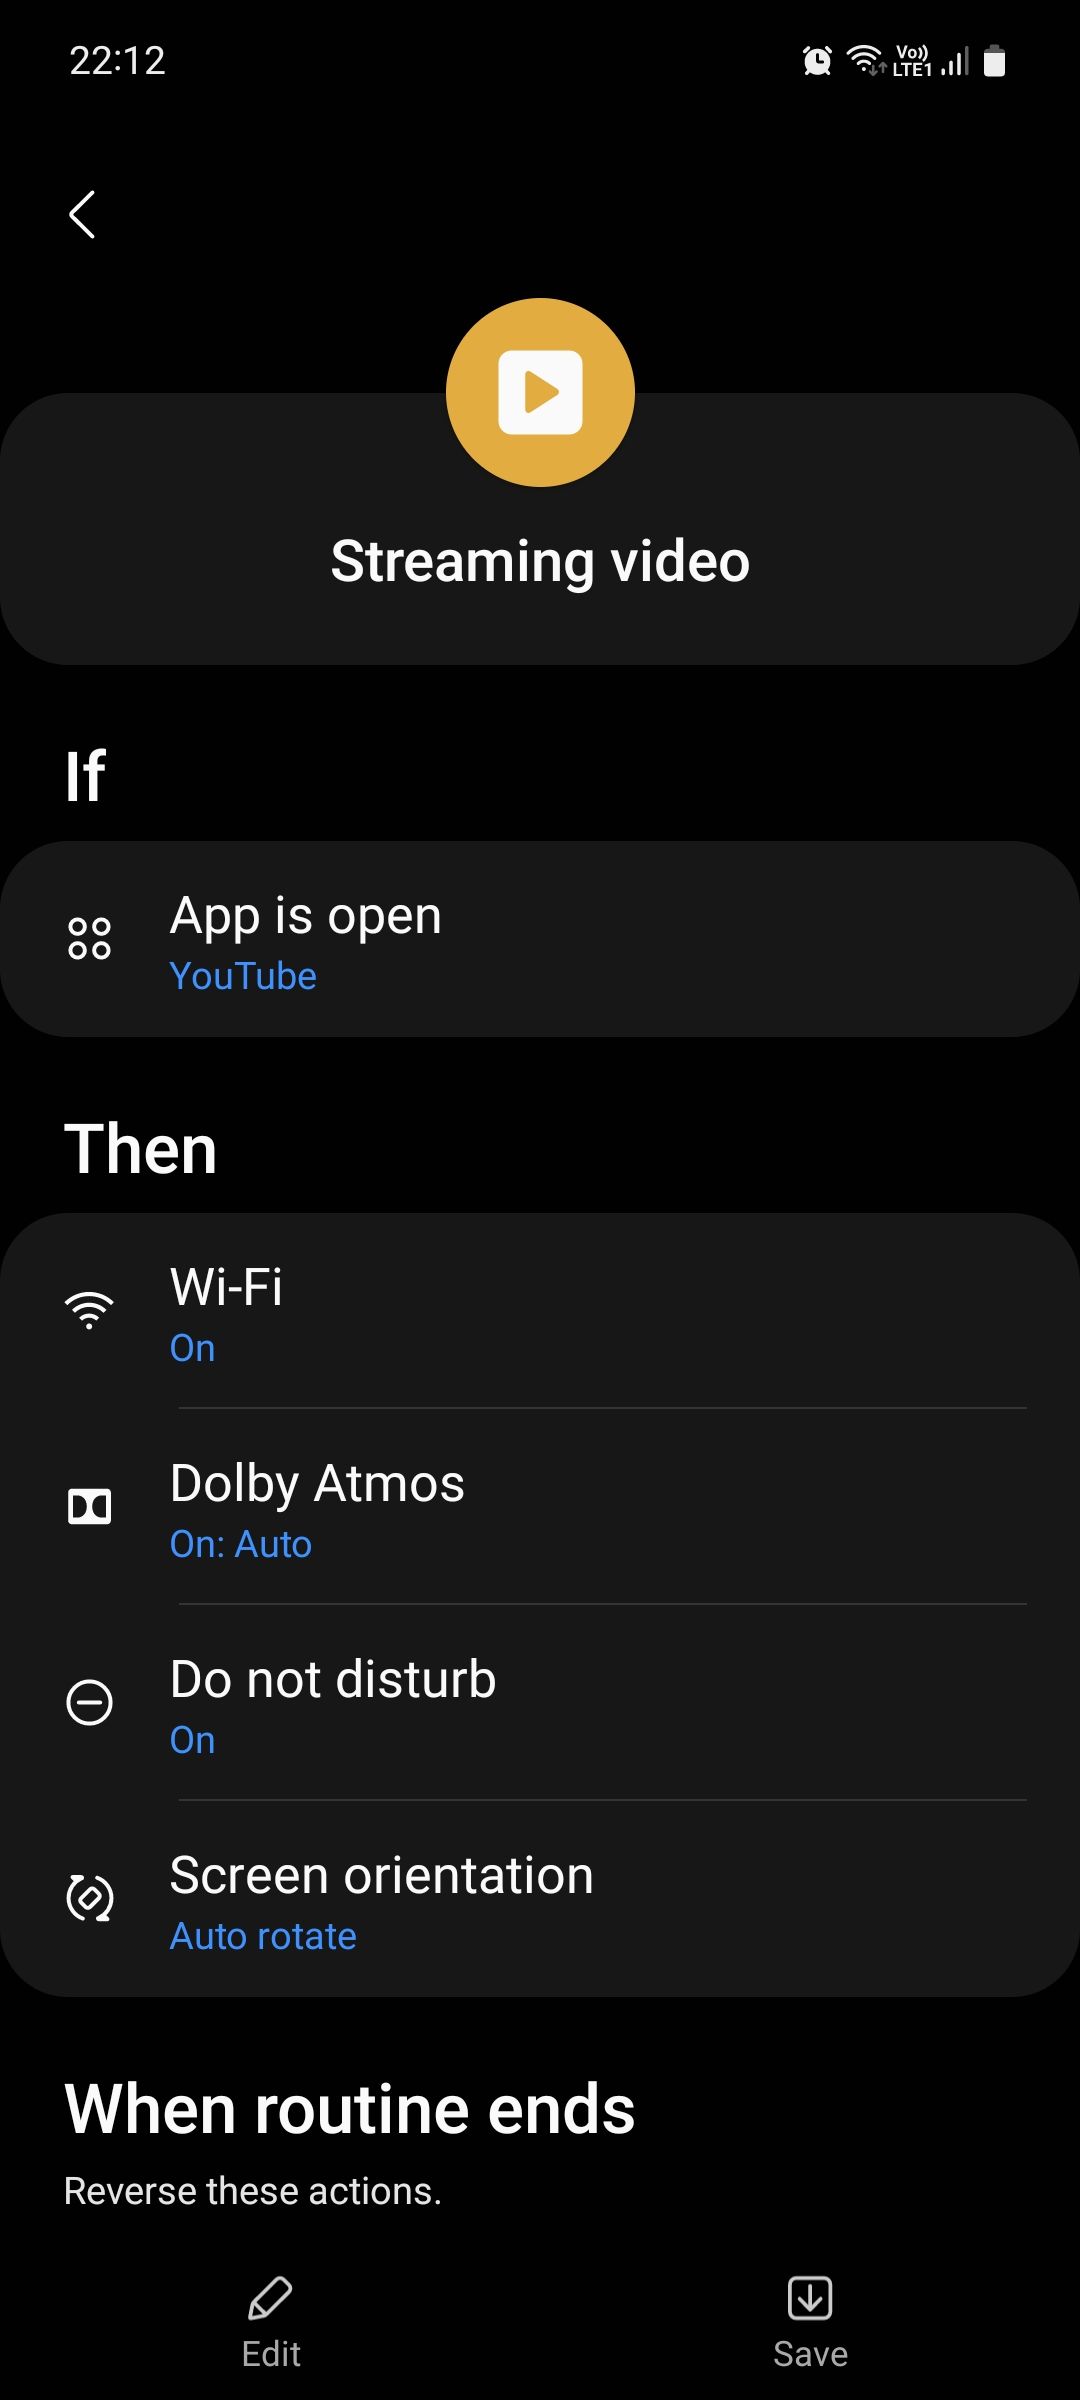 Streaming video routine on Samsung Modes and Routines